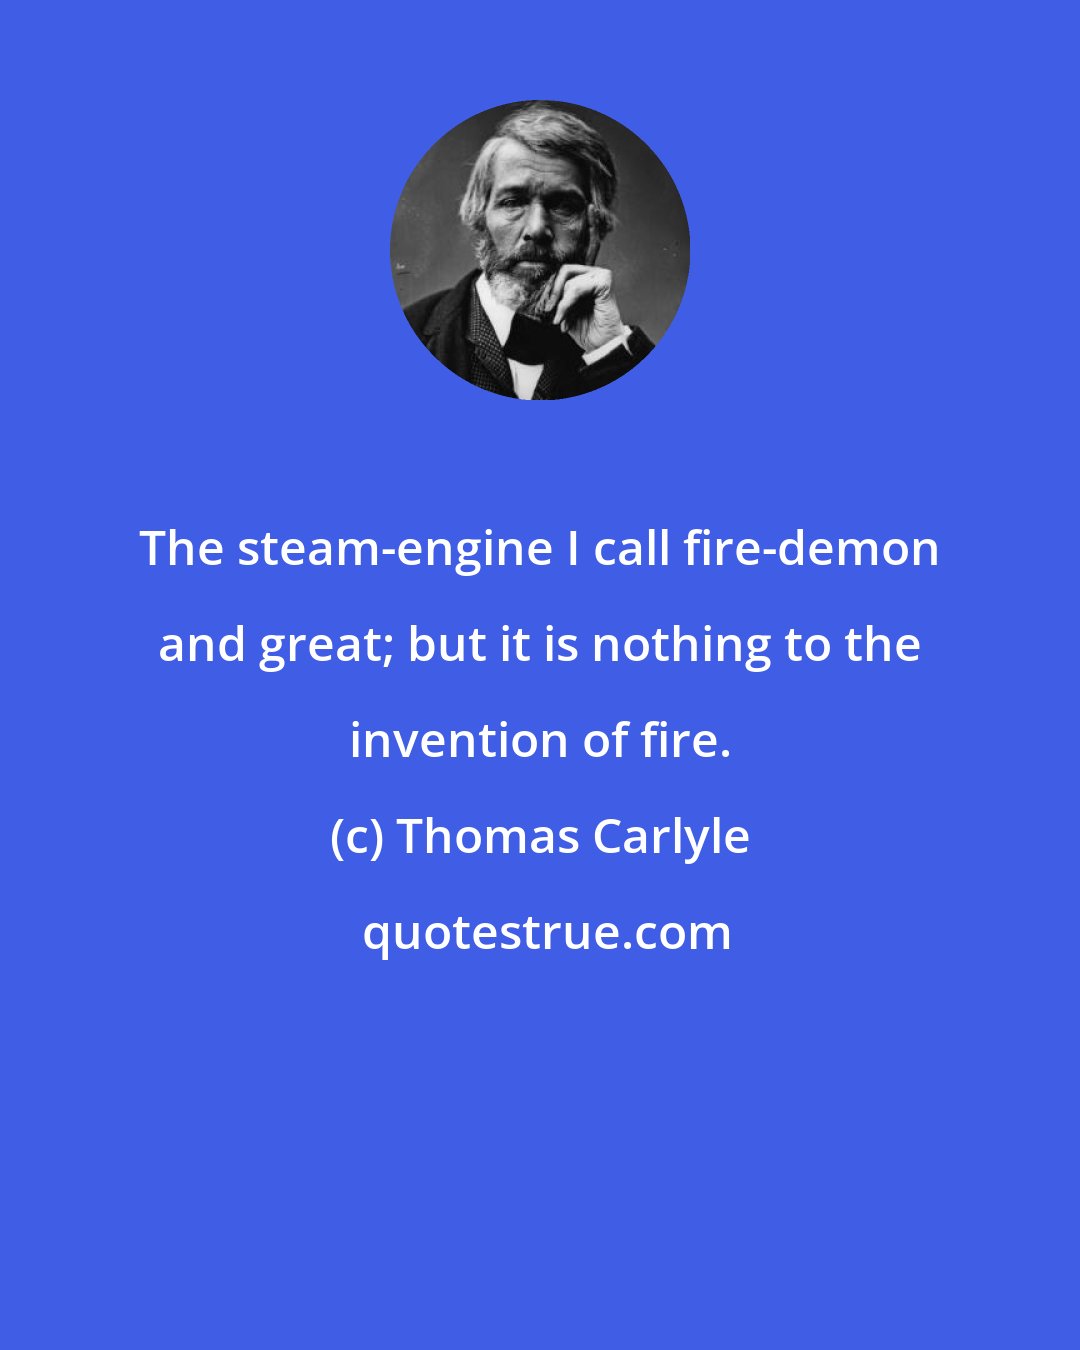 Thomas Carlyle: The steam-engine I call fire-demon and great; but it is nothing to the invention of fire.